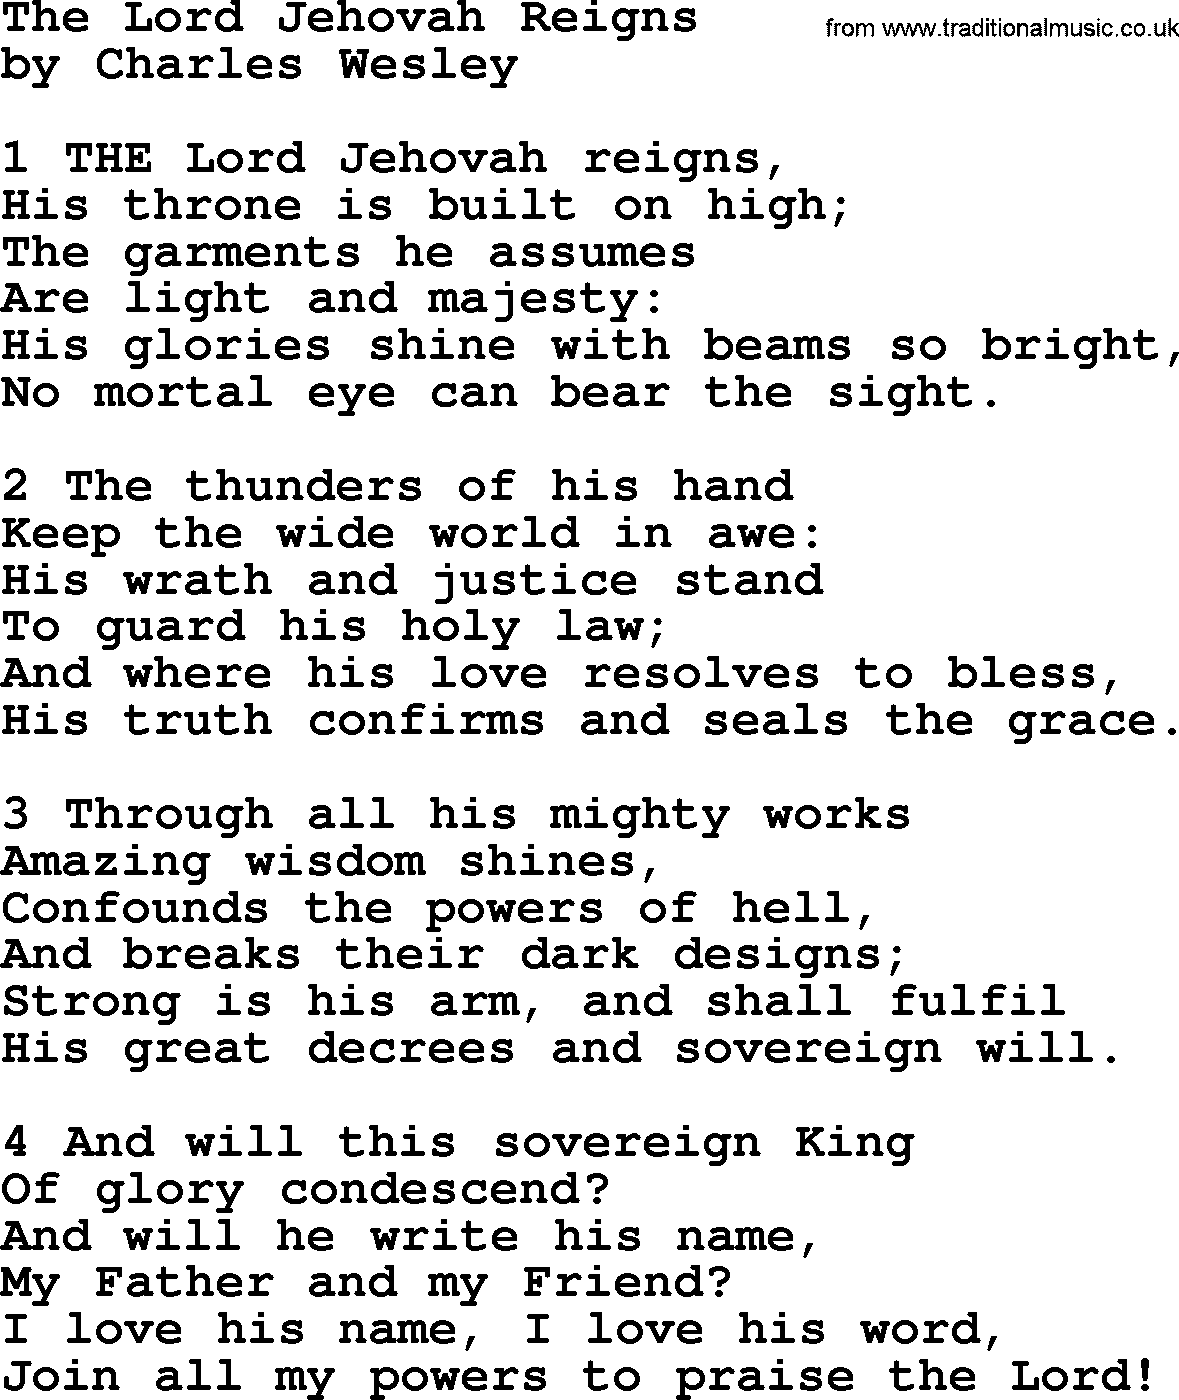 Charles Wesley hymn: The Lord Jehovah Reigns, lyrics